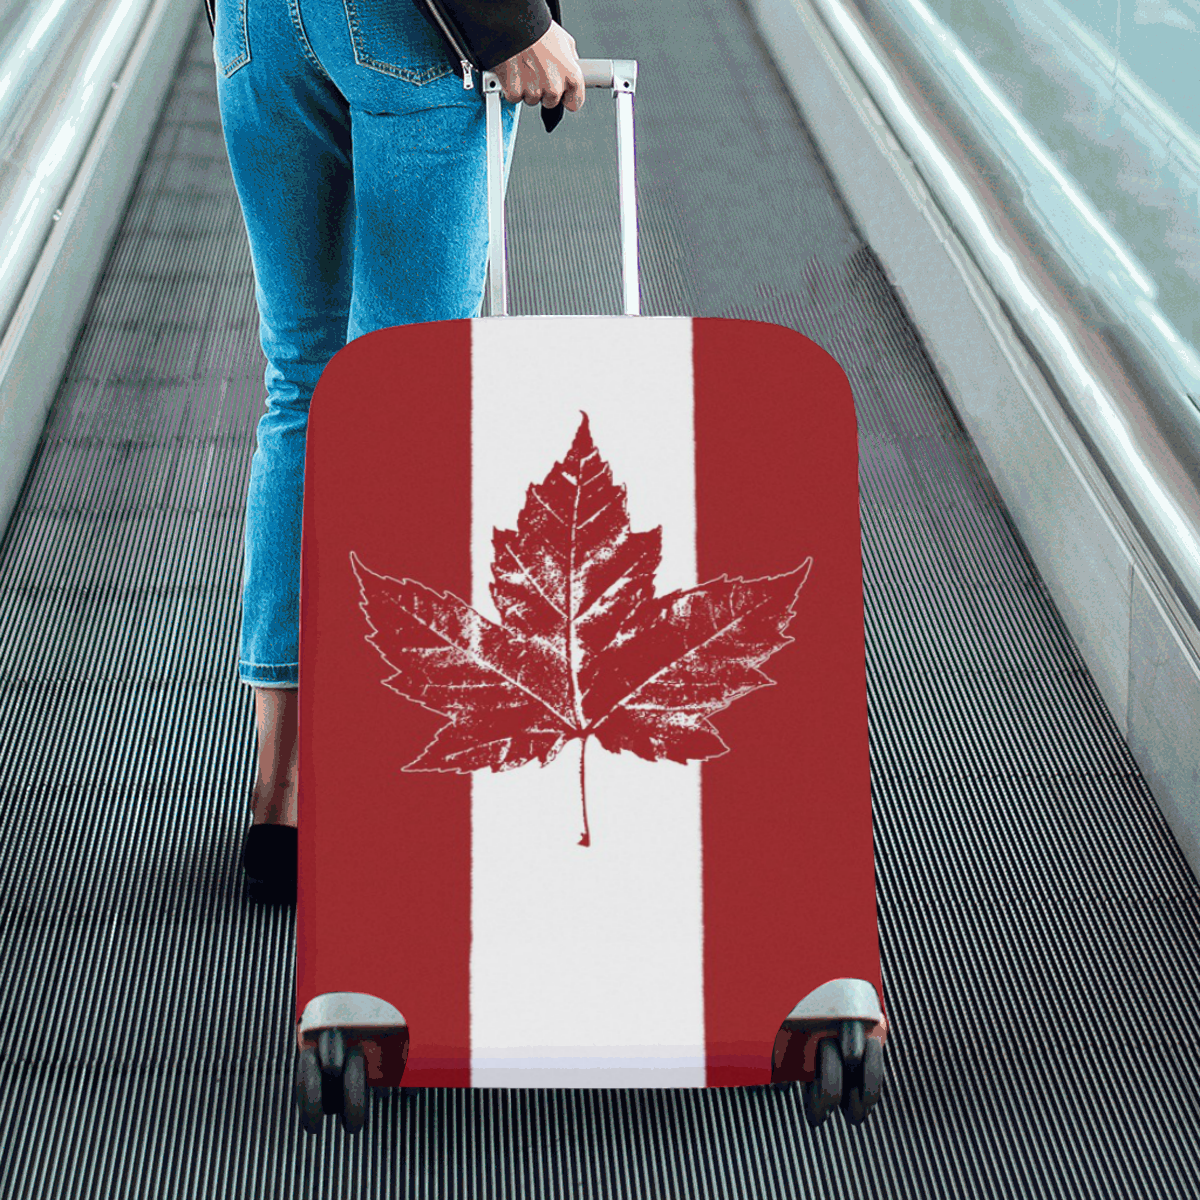 Cool Canada Flag Luggage Luggage Cover/Large 26"-28"